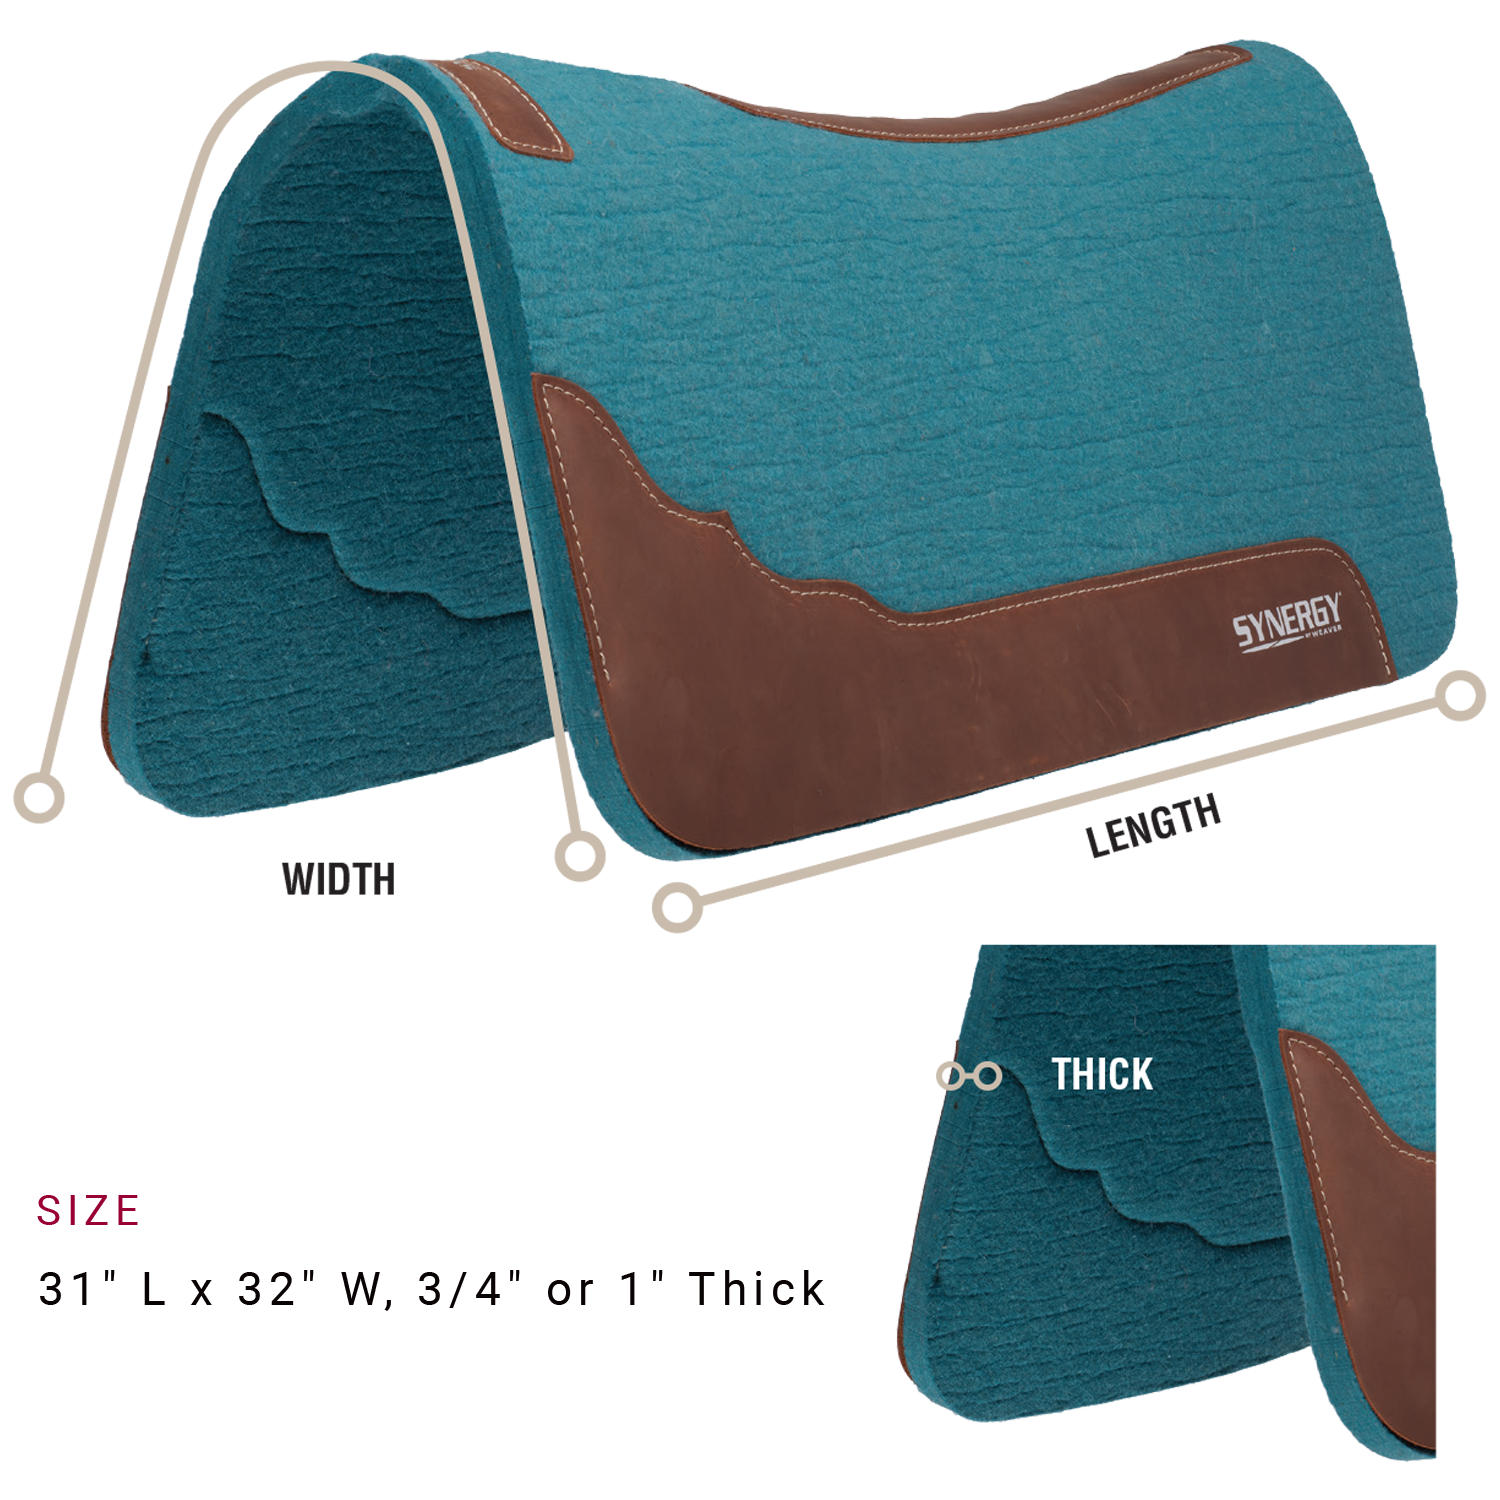 Saddle pad is available in the following sizes: 31 inches long by 32 inches wide, Three-fourths of an inch or 1 inch thick